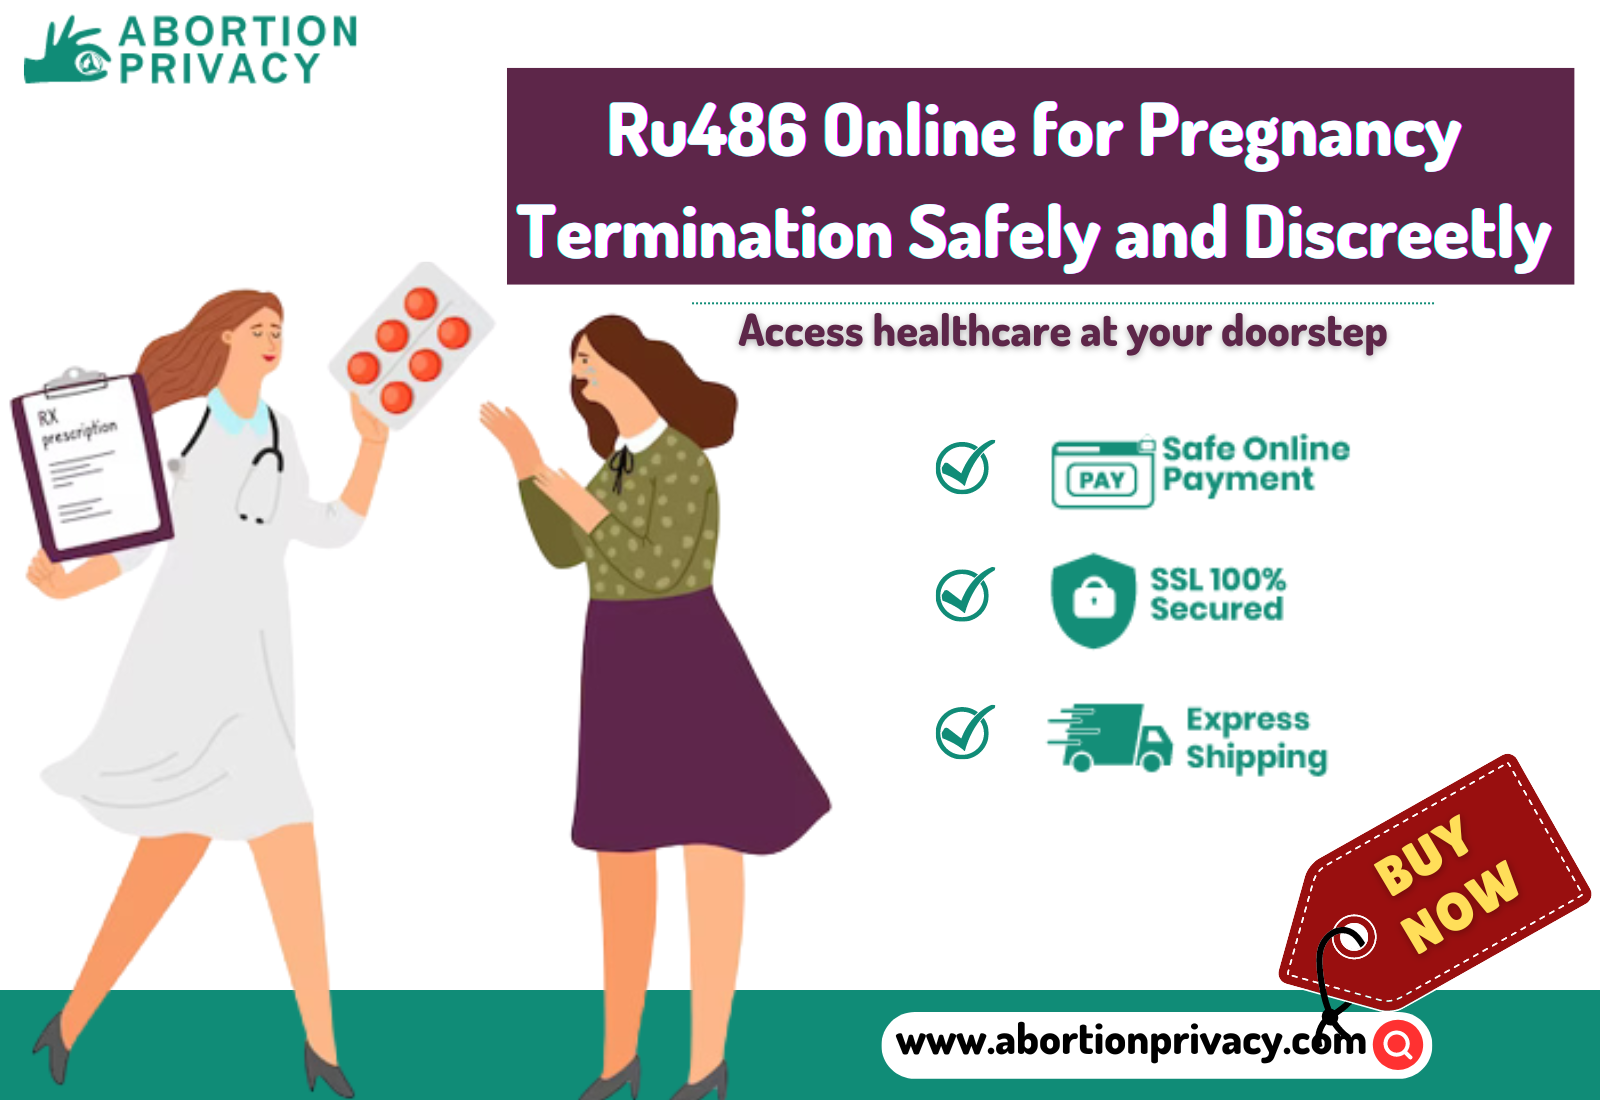 Ru486 Online for Pregnancy Termination Safely and Discreetly - photo